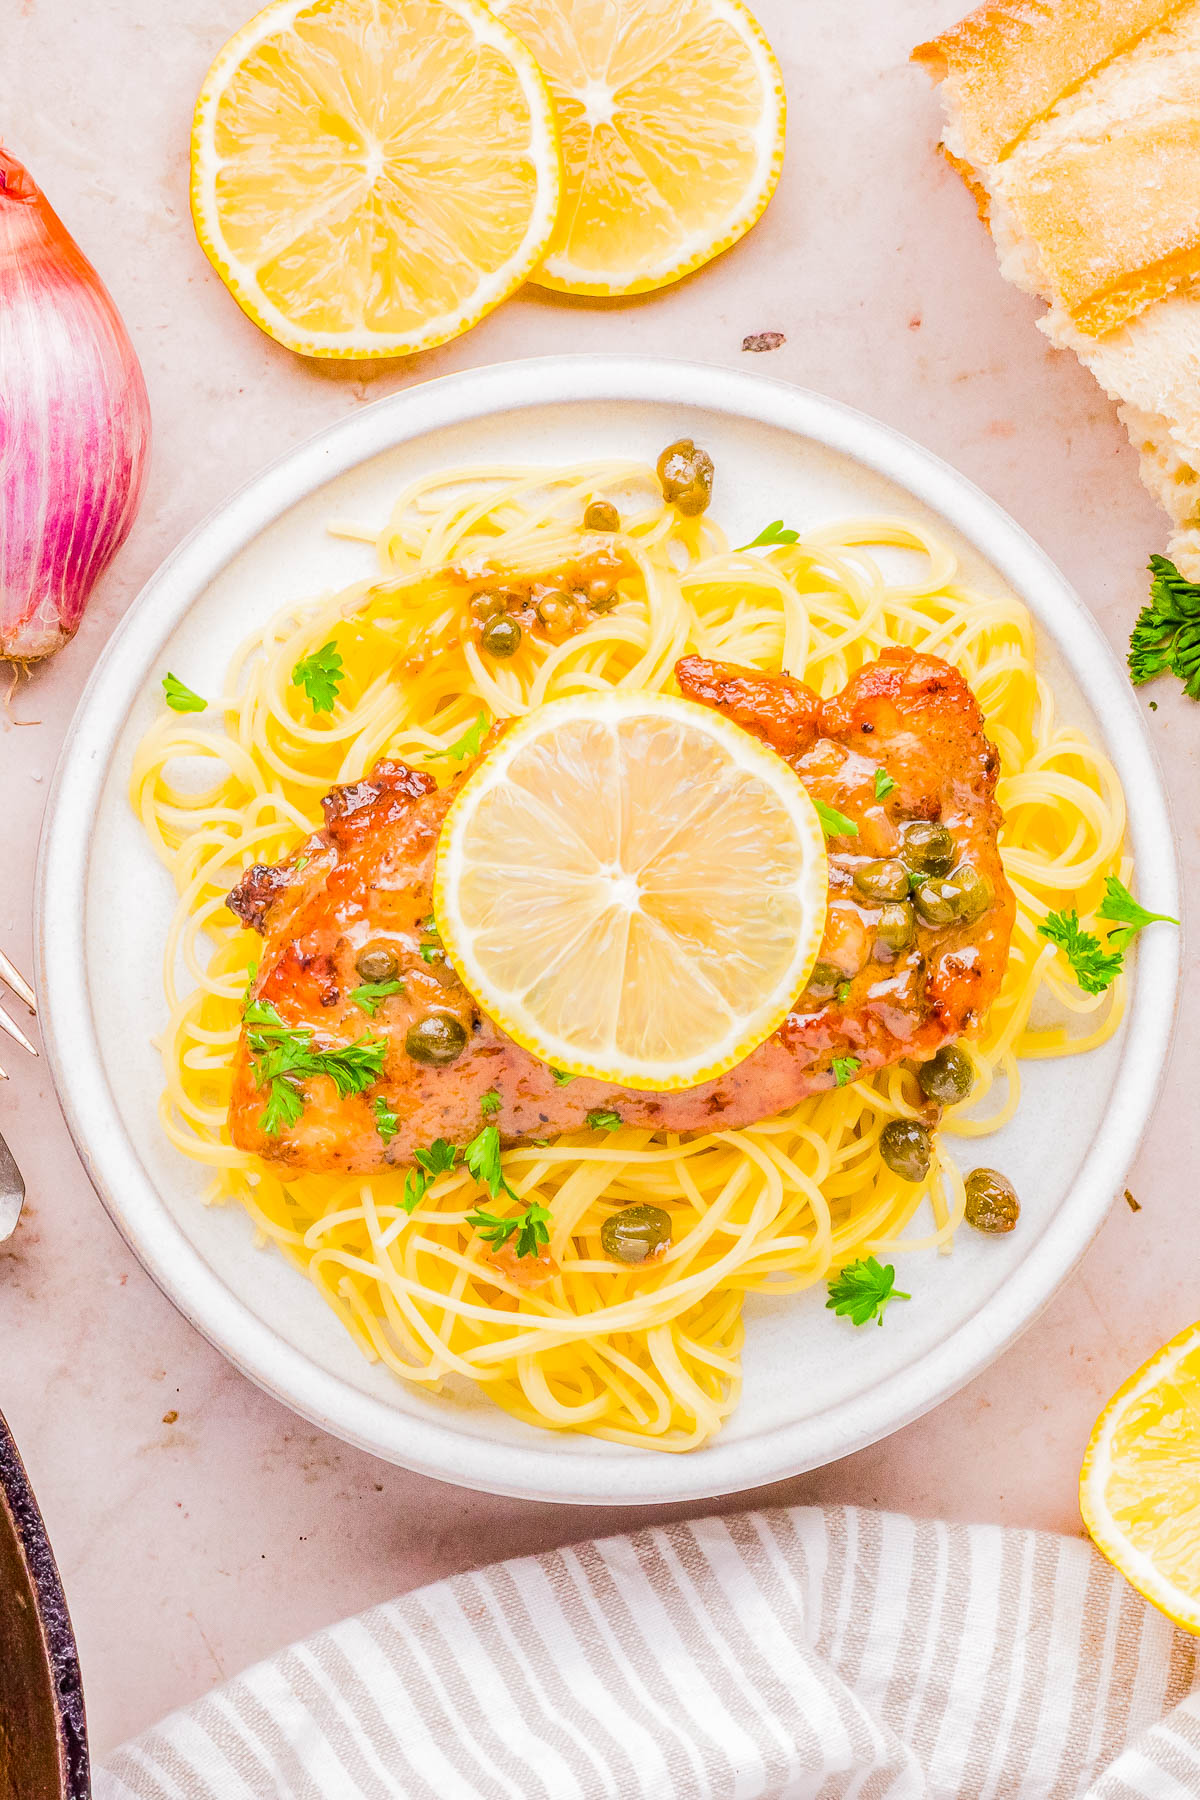 A plate of spaghetti topped with a chicken fillet, capers, and lemon slices, garnished with fresh herbs.